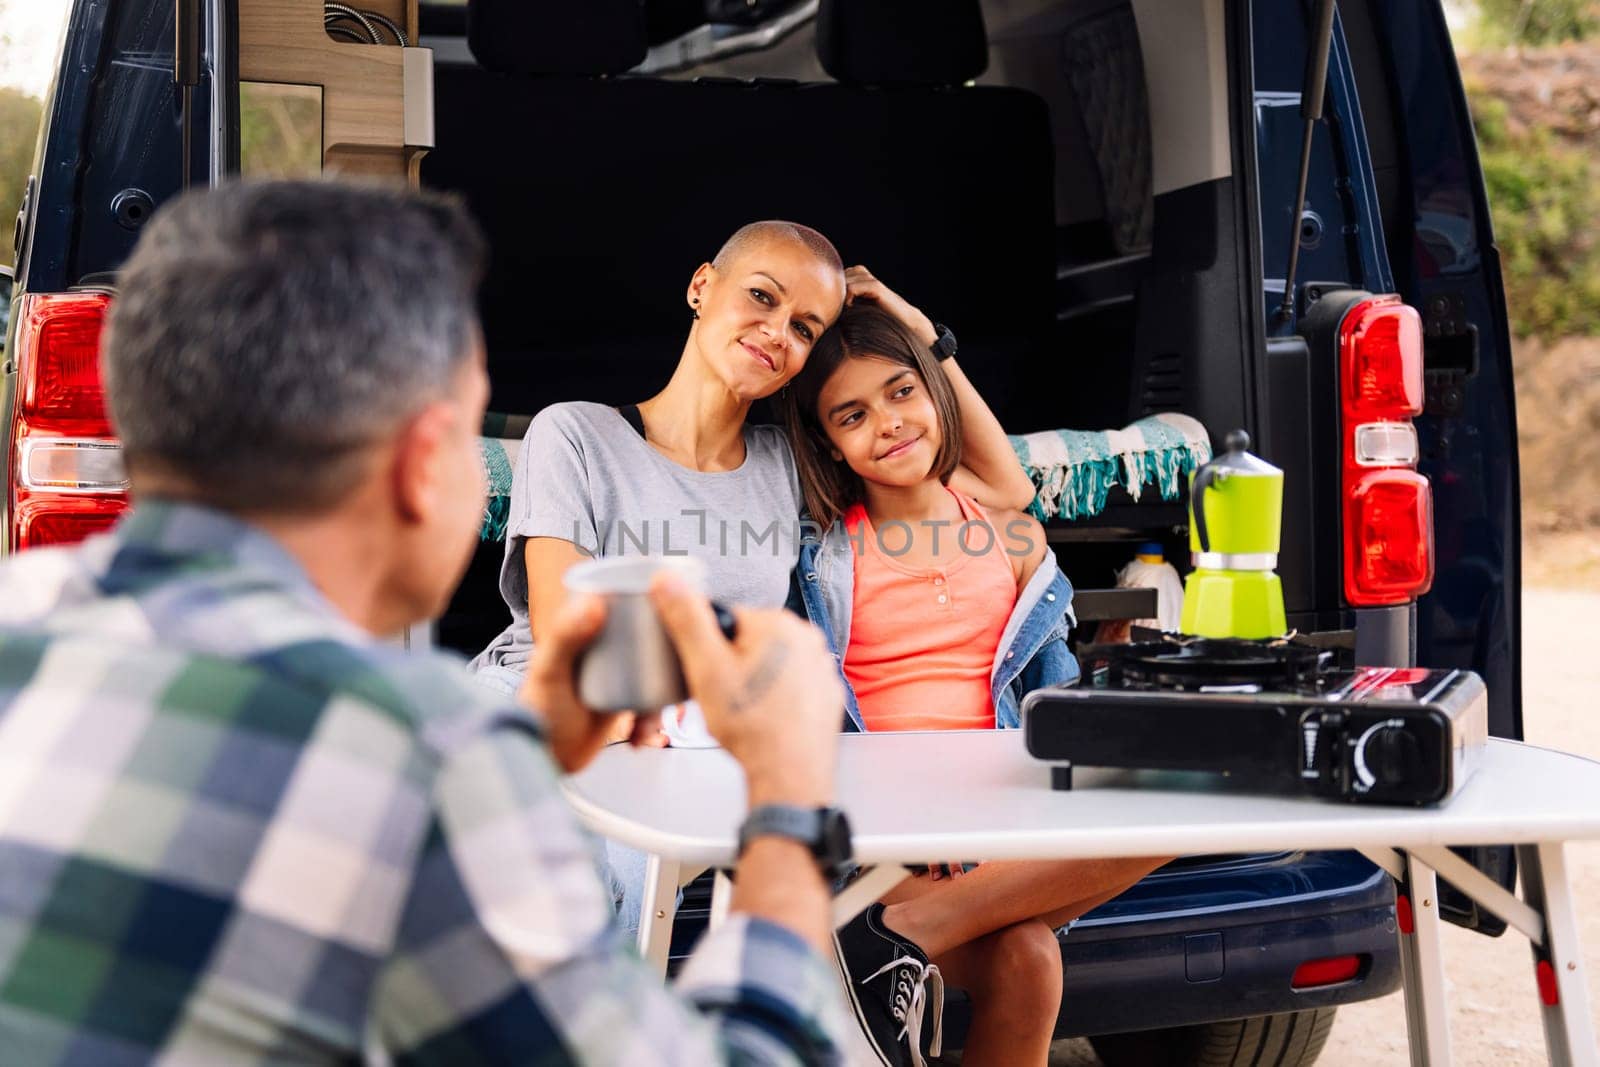 family camping in the countryside with their camper van, concept of active tourism in nature and outdoor activities with children